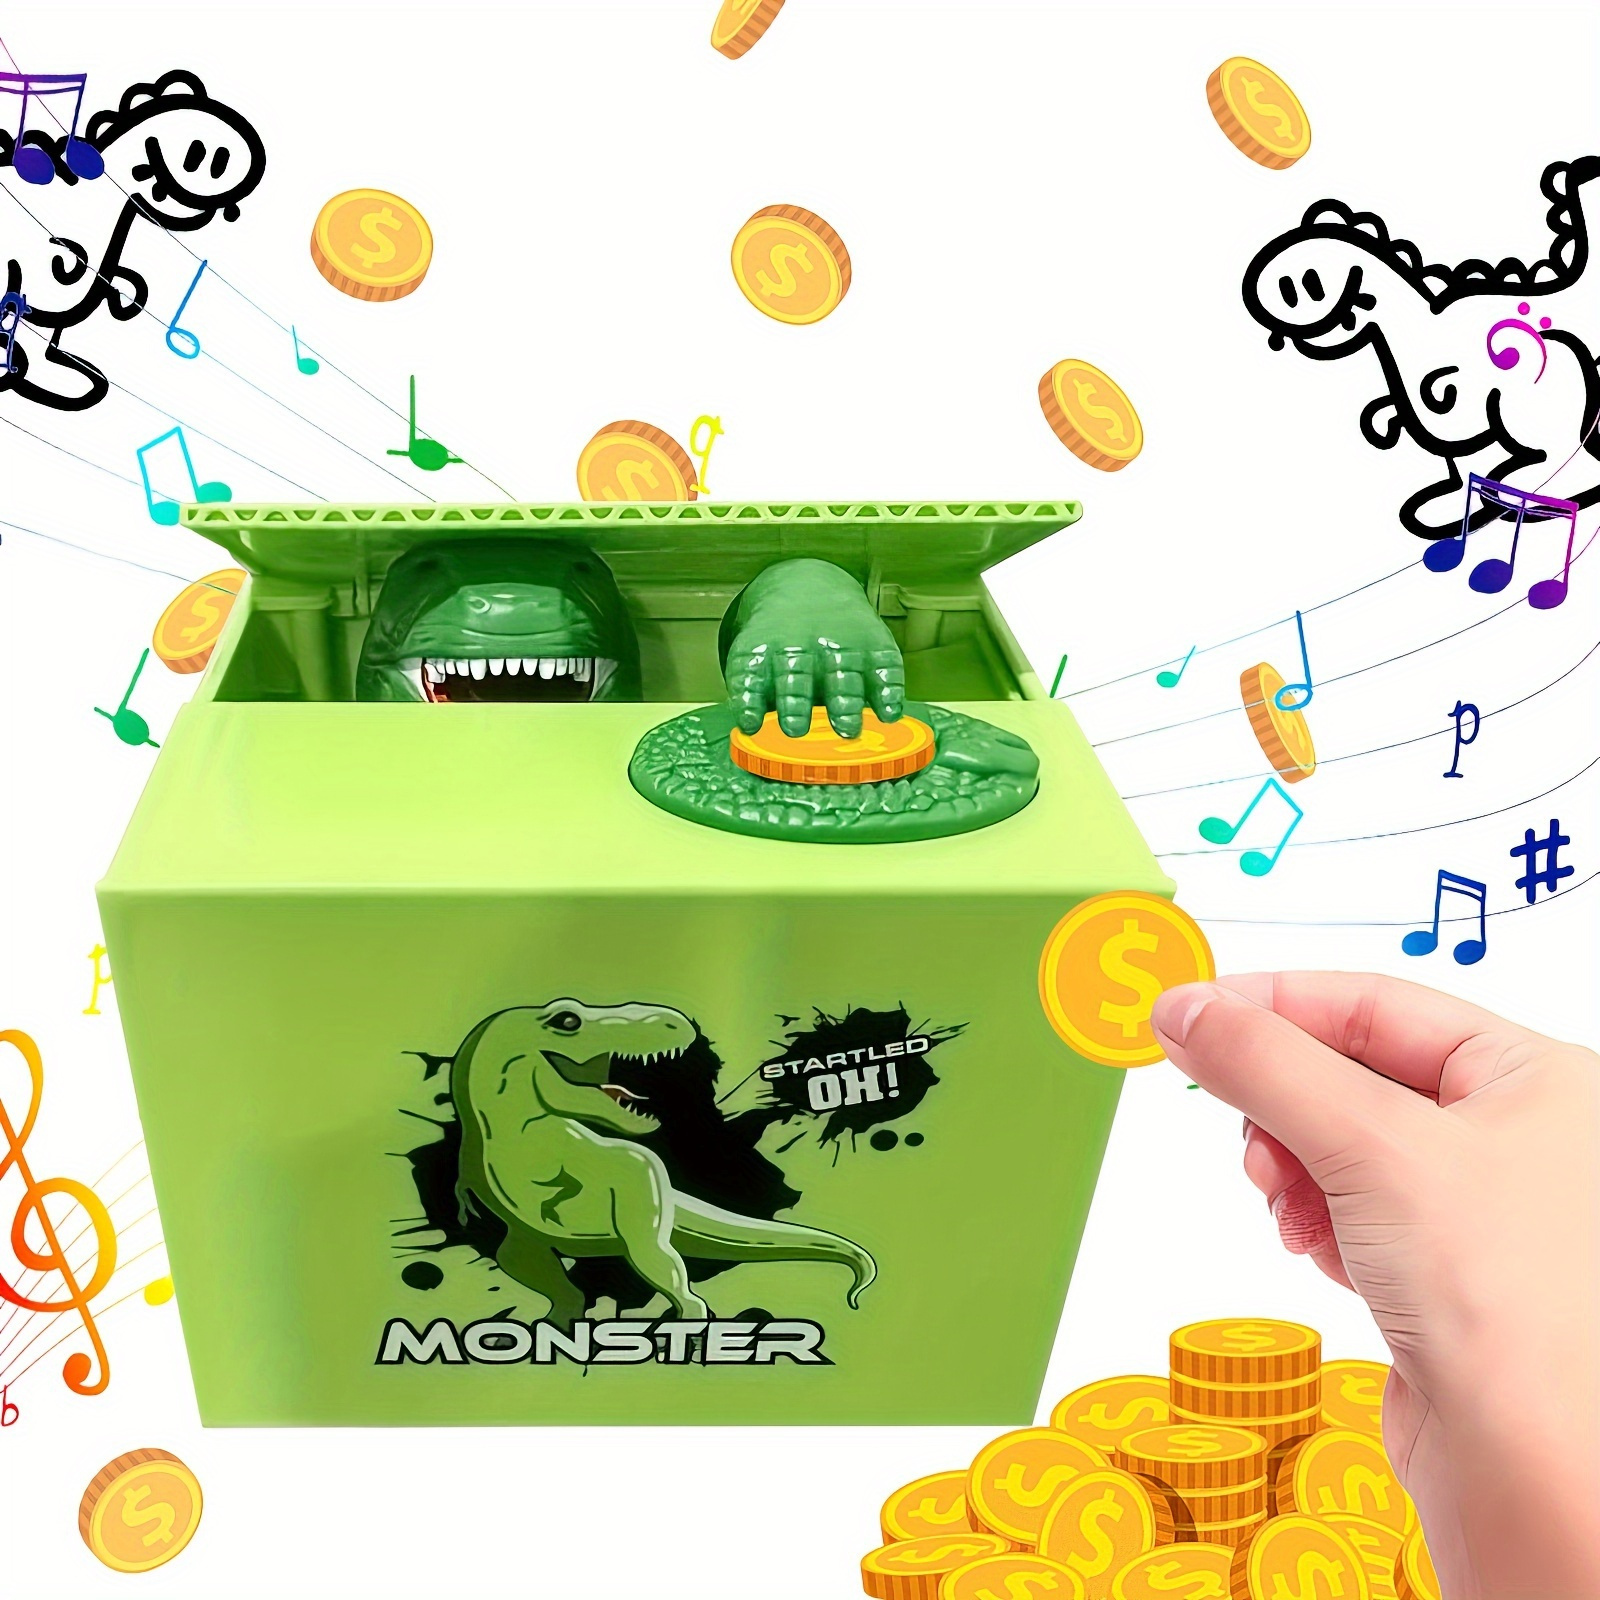 

Dinosaurs Electronic Saving Bank Toys For Children - Perfect Gifts For Christmas & Birthdays! Easter Gift